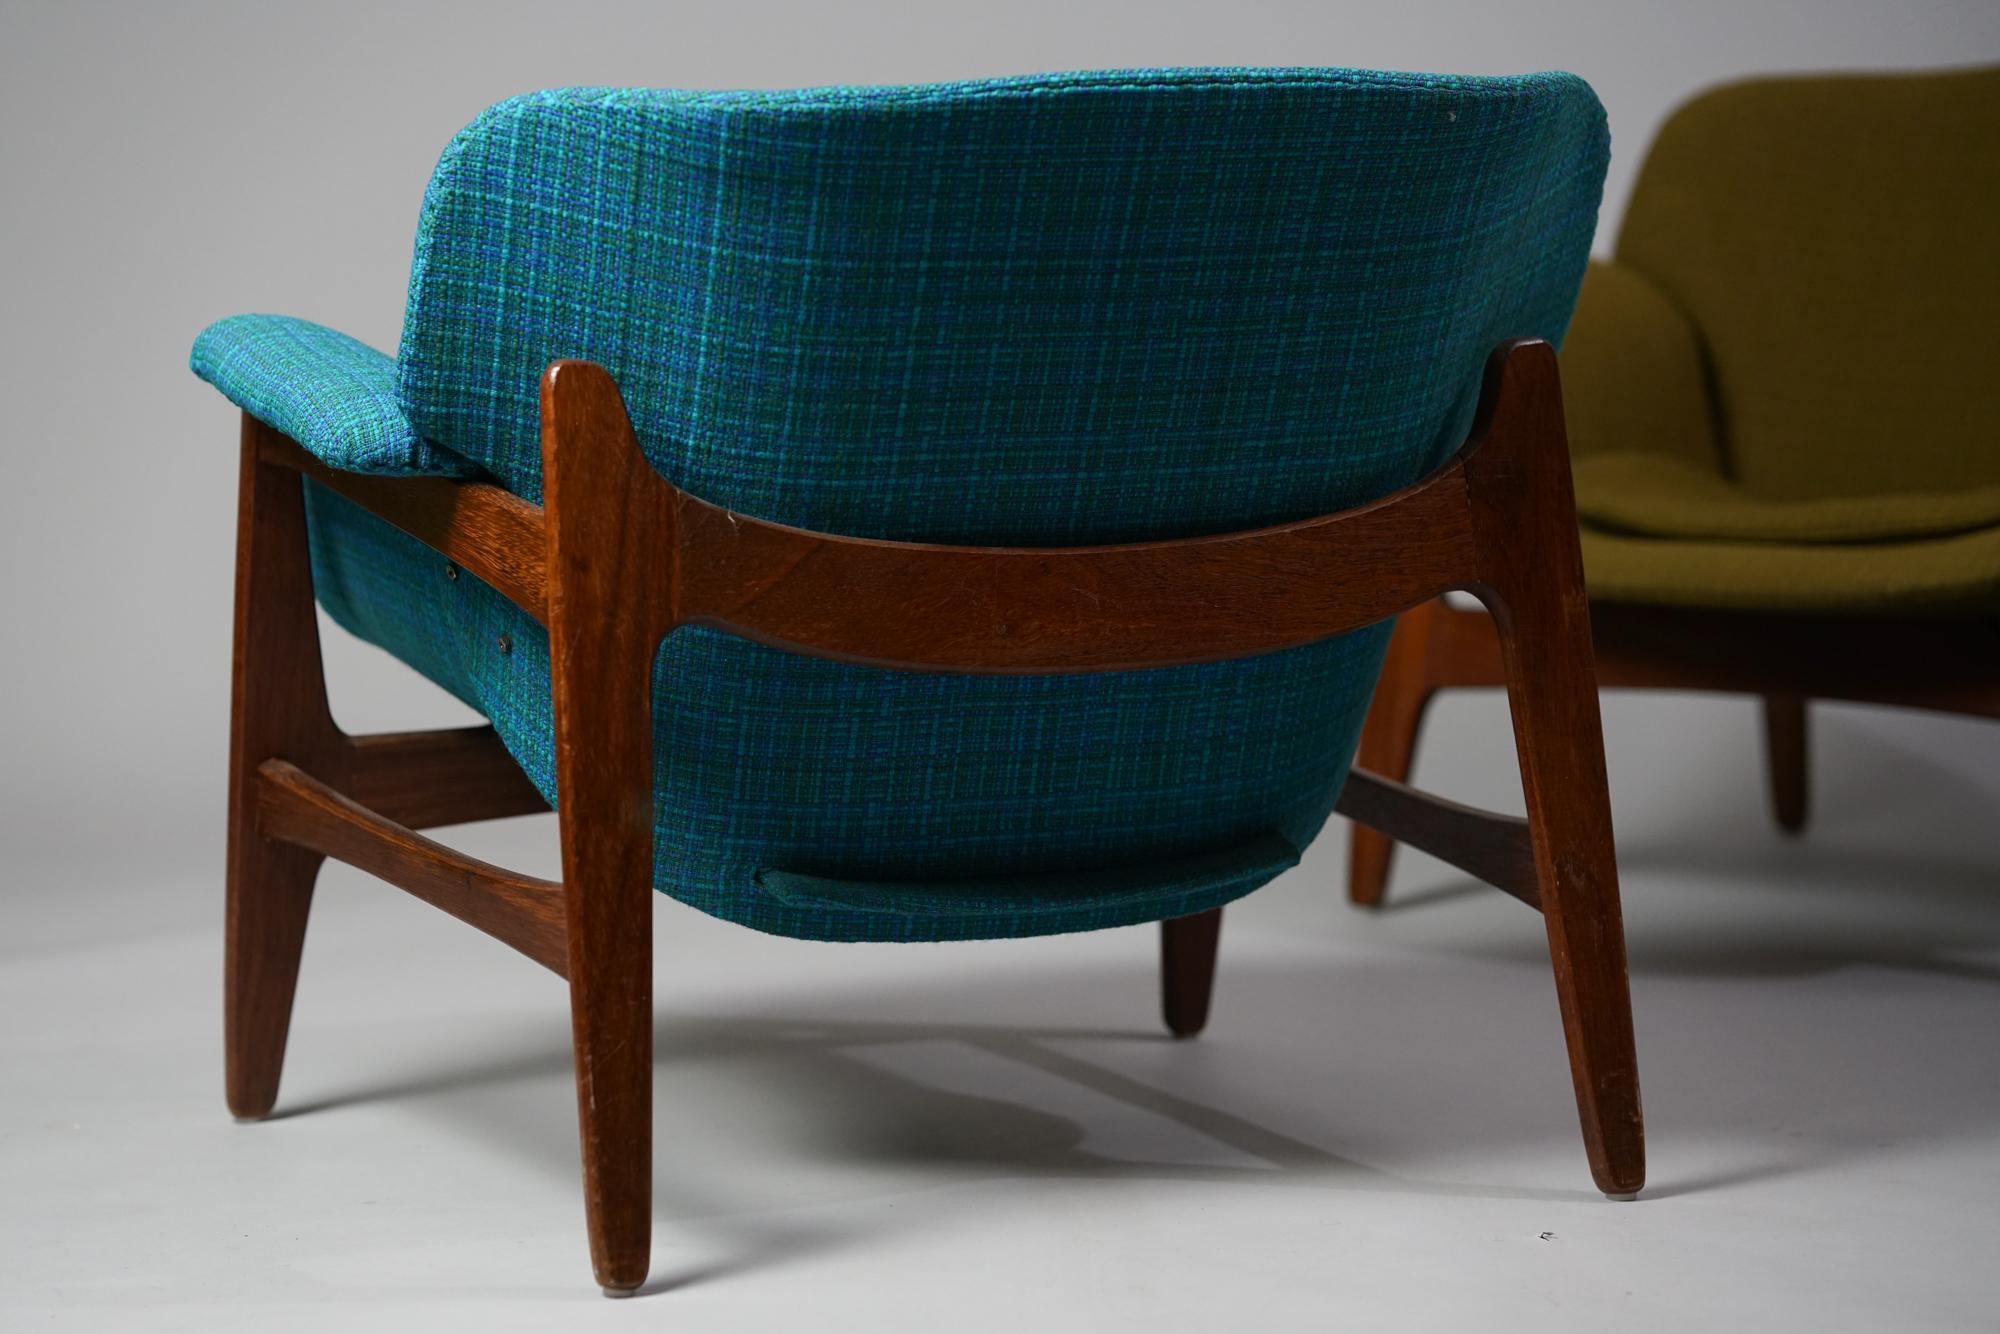 Set of Two Carin Bryggman Armchairs for Boman OY, 1950s/1960s For Sale 1